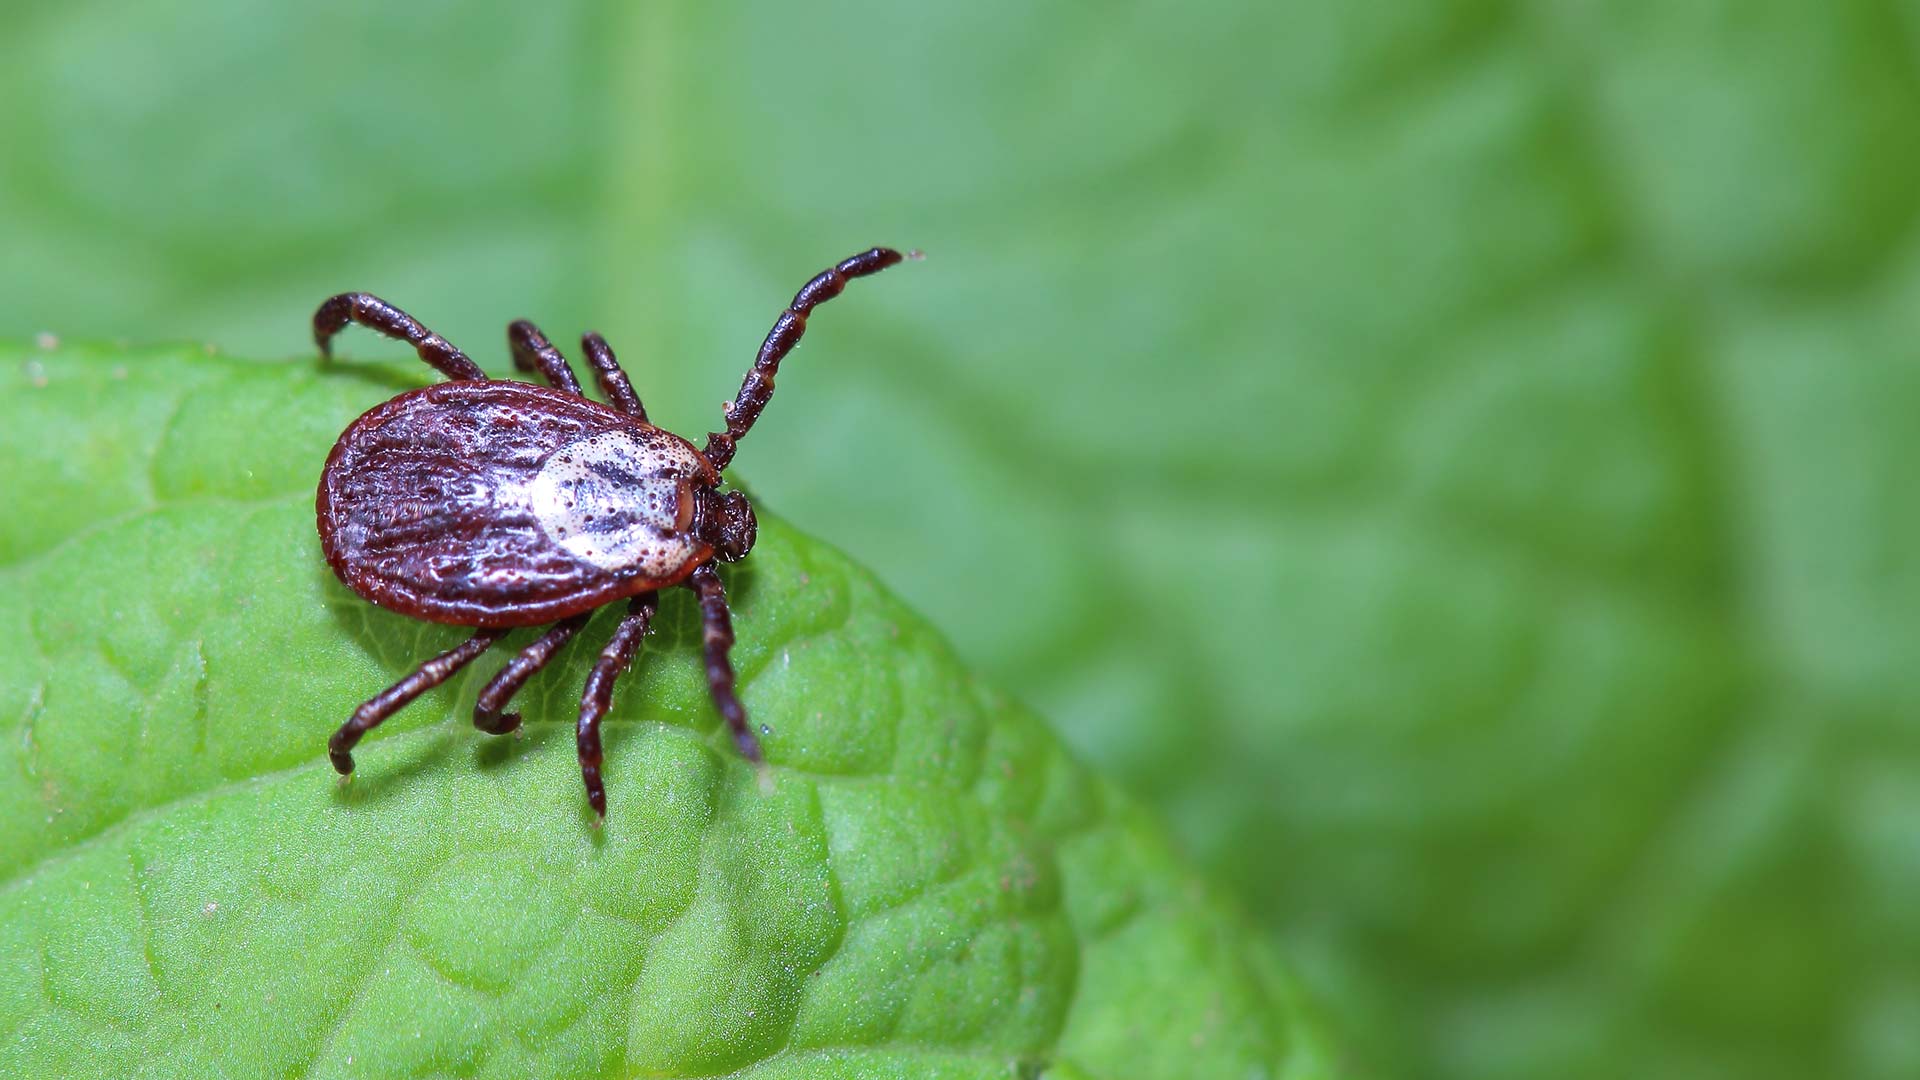 A tick spotted on a green leaf near Plano, TX.